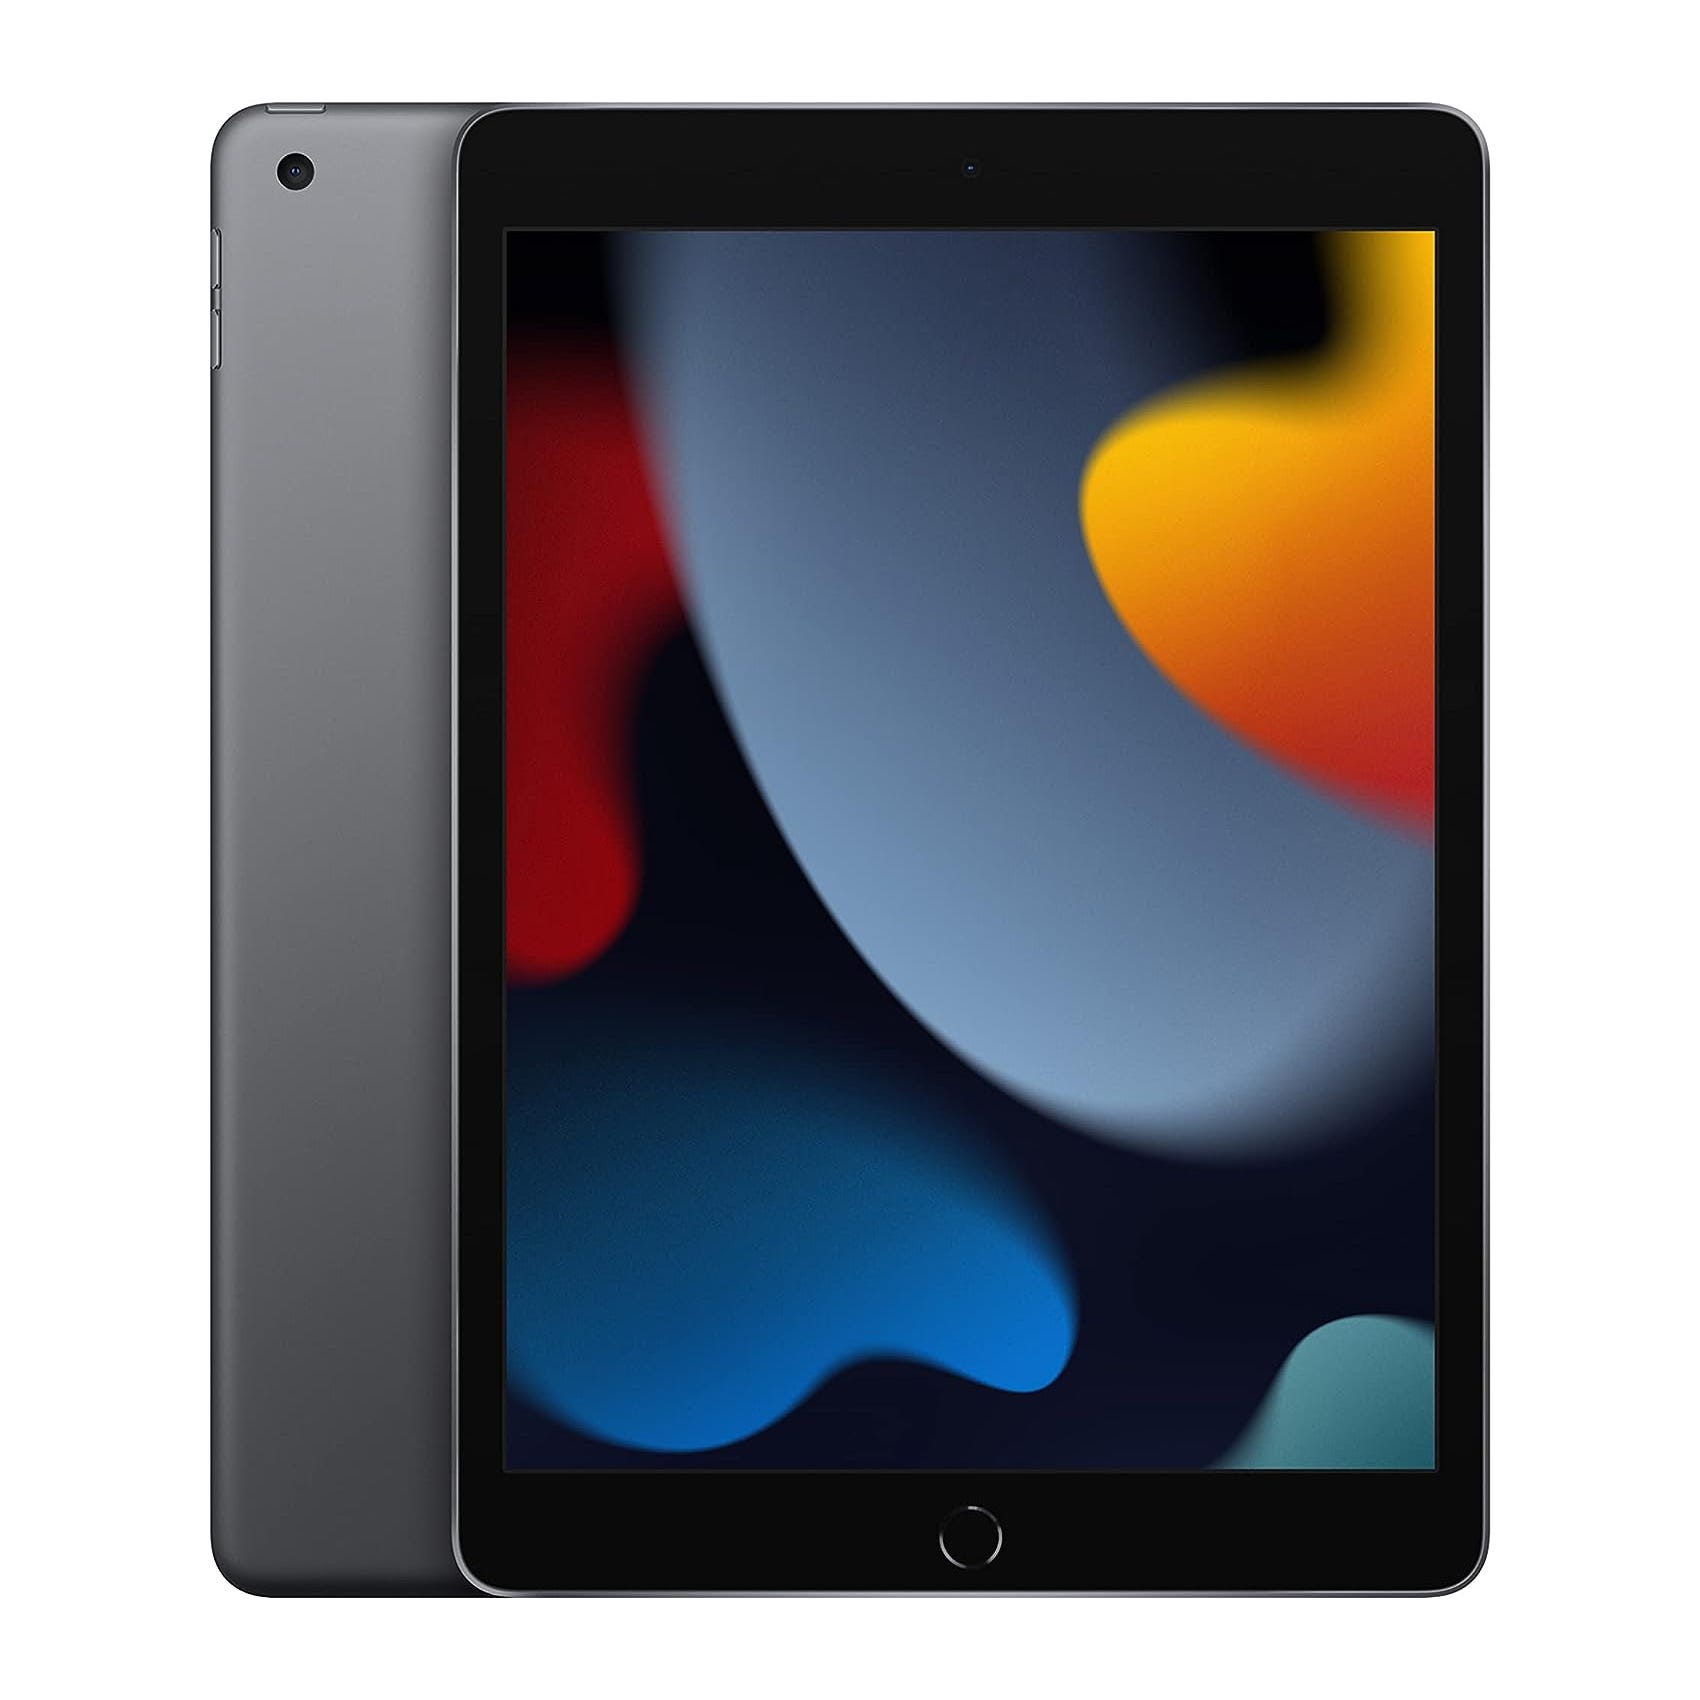 An iPad with a black bezel, button on the bottom, and a colorful wallpaper.